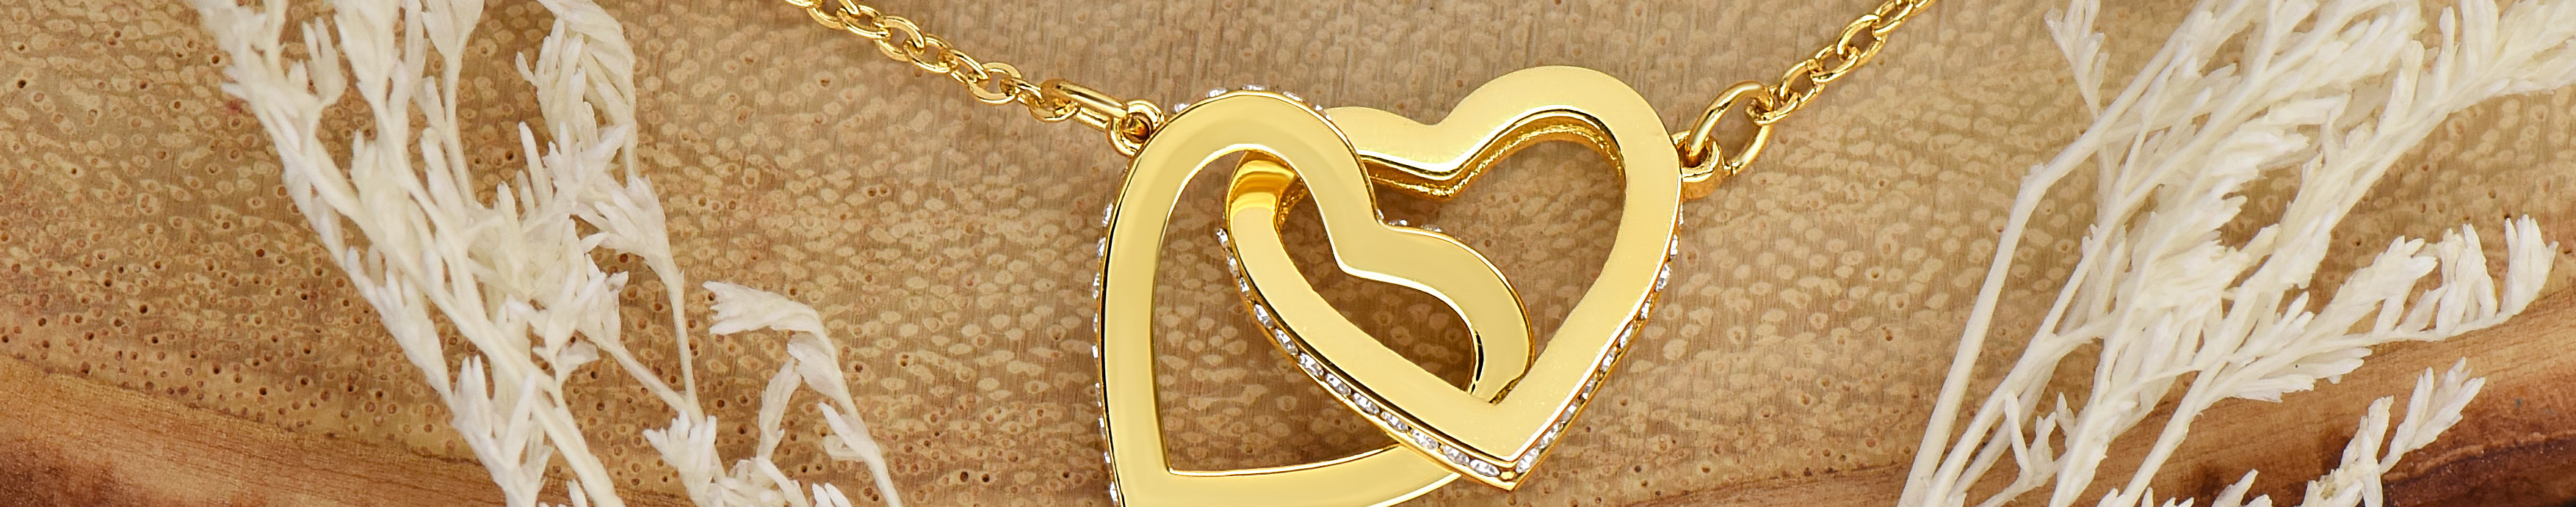 LoveSkyCenter Jewelry's profile banner